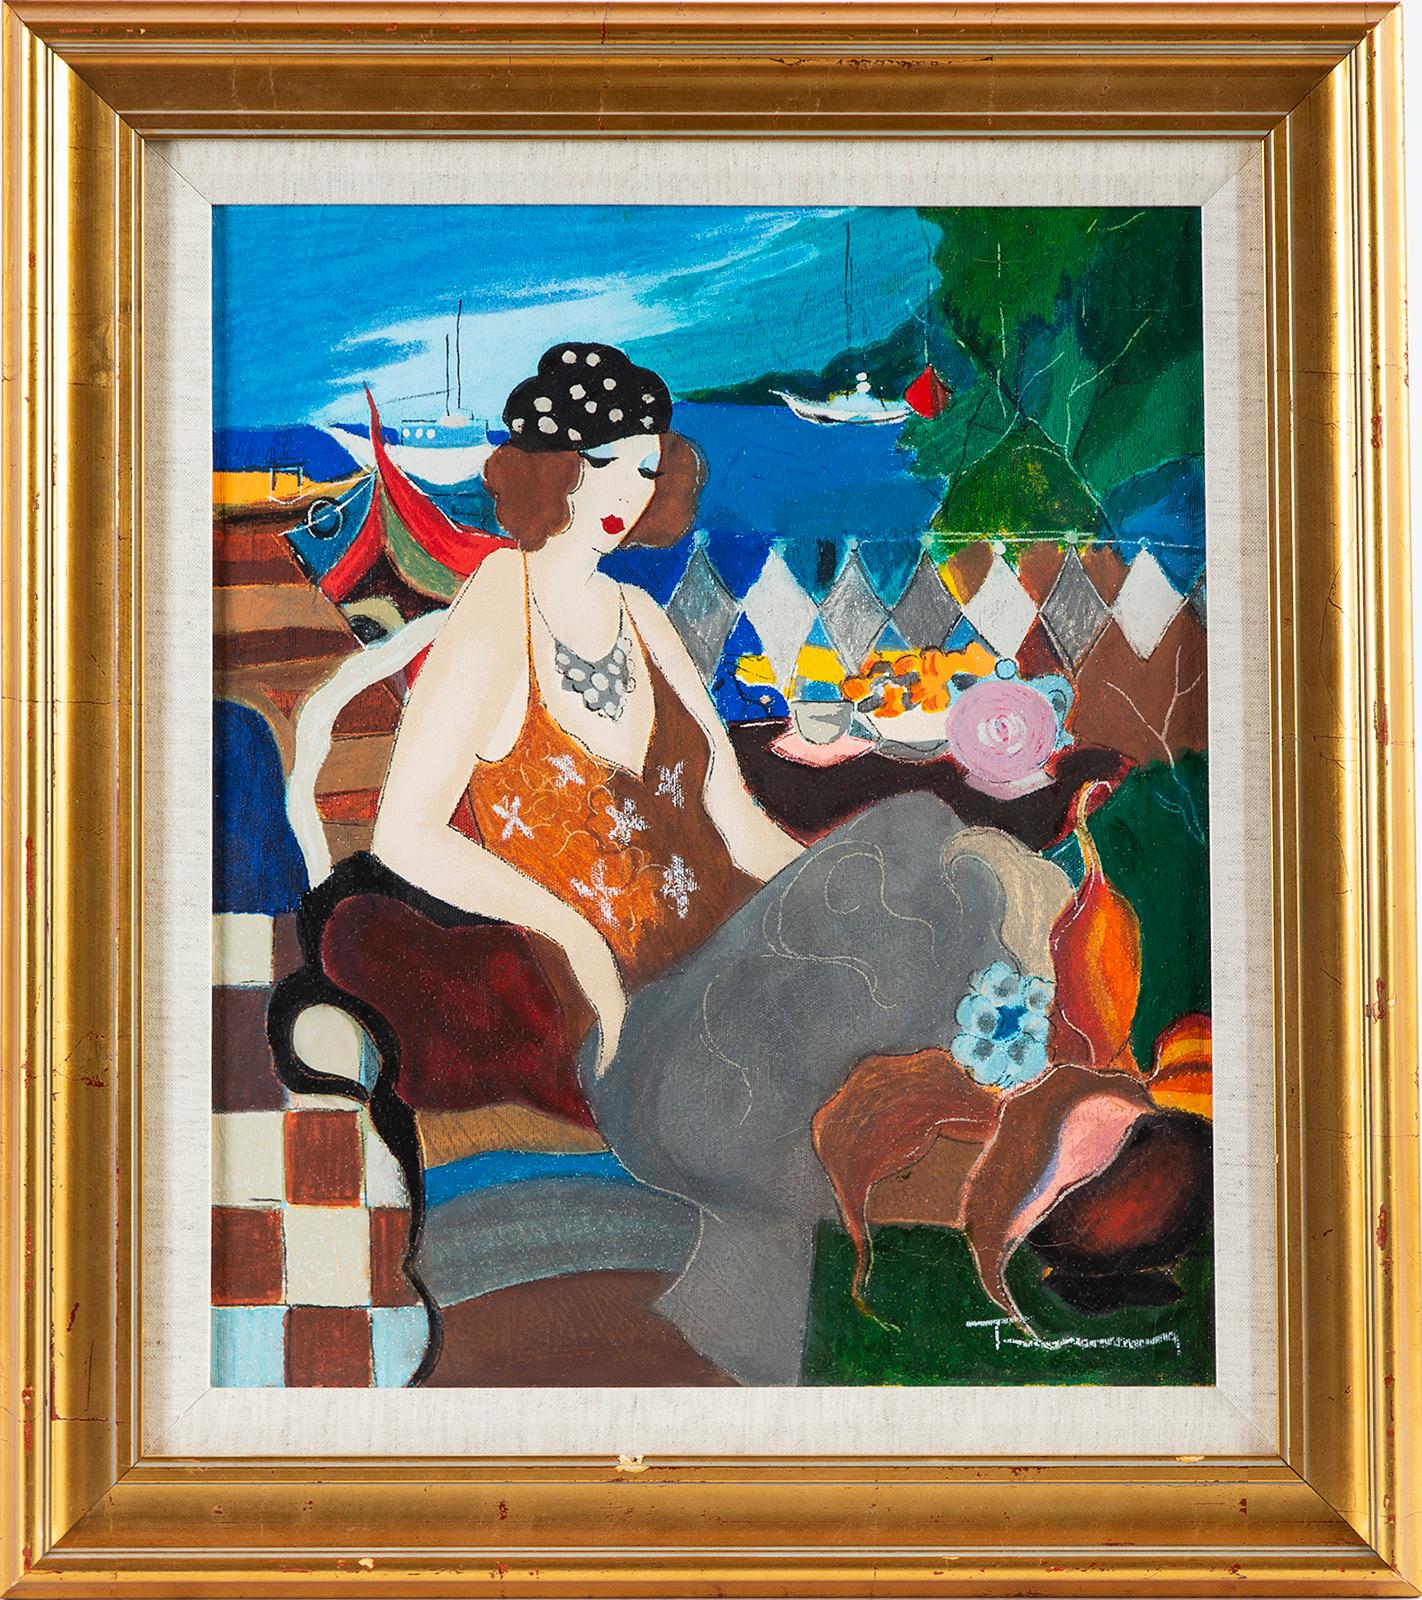 Itzchak Tarkay - Untitled
Acrylic on canvas
Size 22 x 18 inches
Framed
Perfect condition. Certificate of Authenticity included.

Typical of the Itzchak Tarkay’s style, this leisurely parlor scene builds a slight anticipation with the organization of